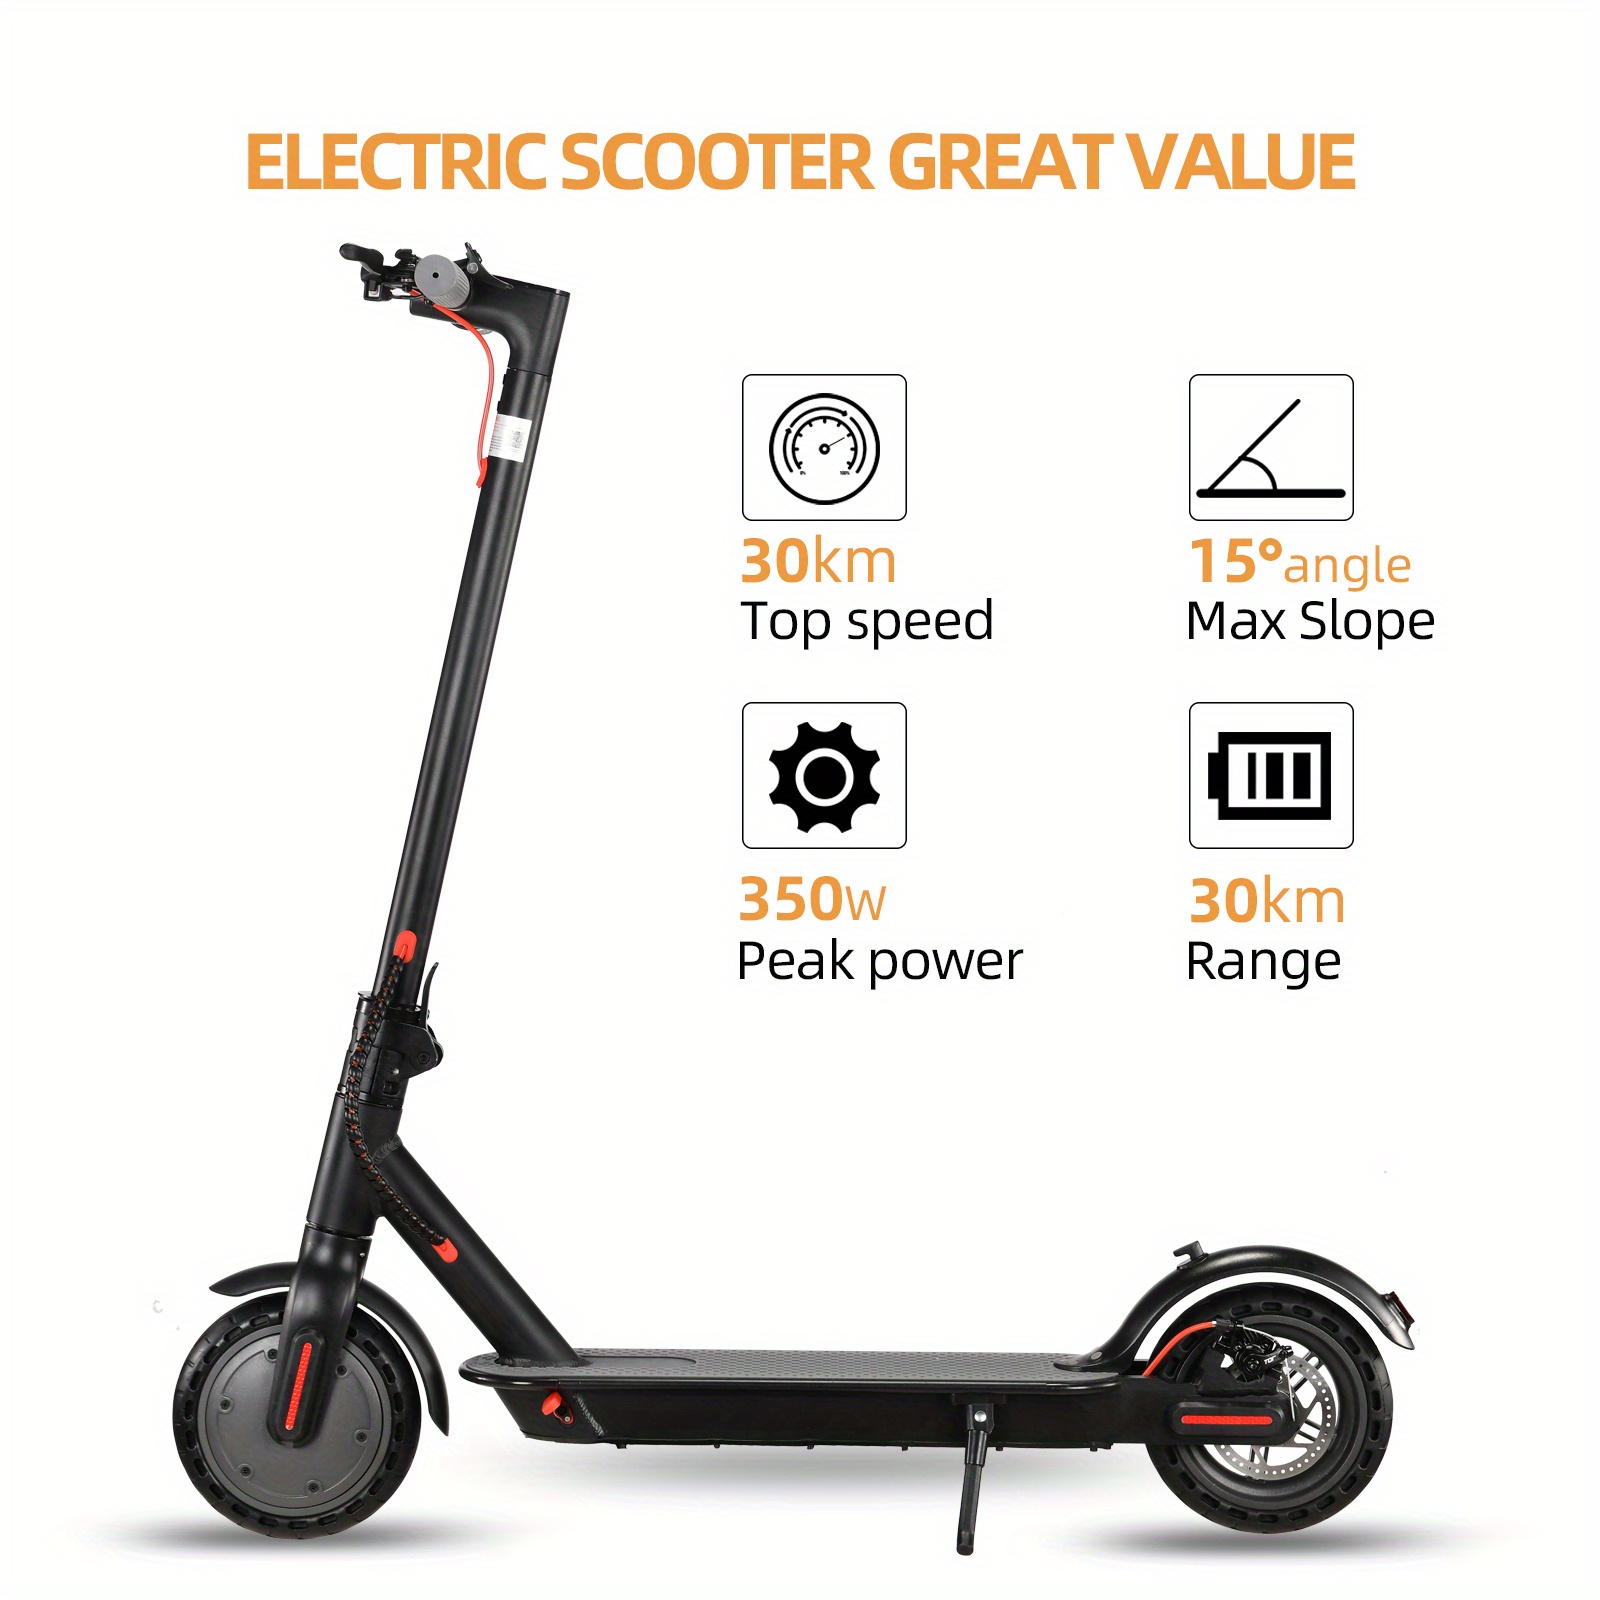 

Electric Scooter. Foldable. Compact And Lightweight. Say Goodbye To Commuting Congestion. Top Speed Of 30km/h. 8.5 Inch Explosion-proof Tires. Respond To Various Ground Conditions